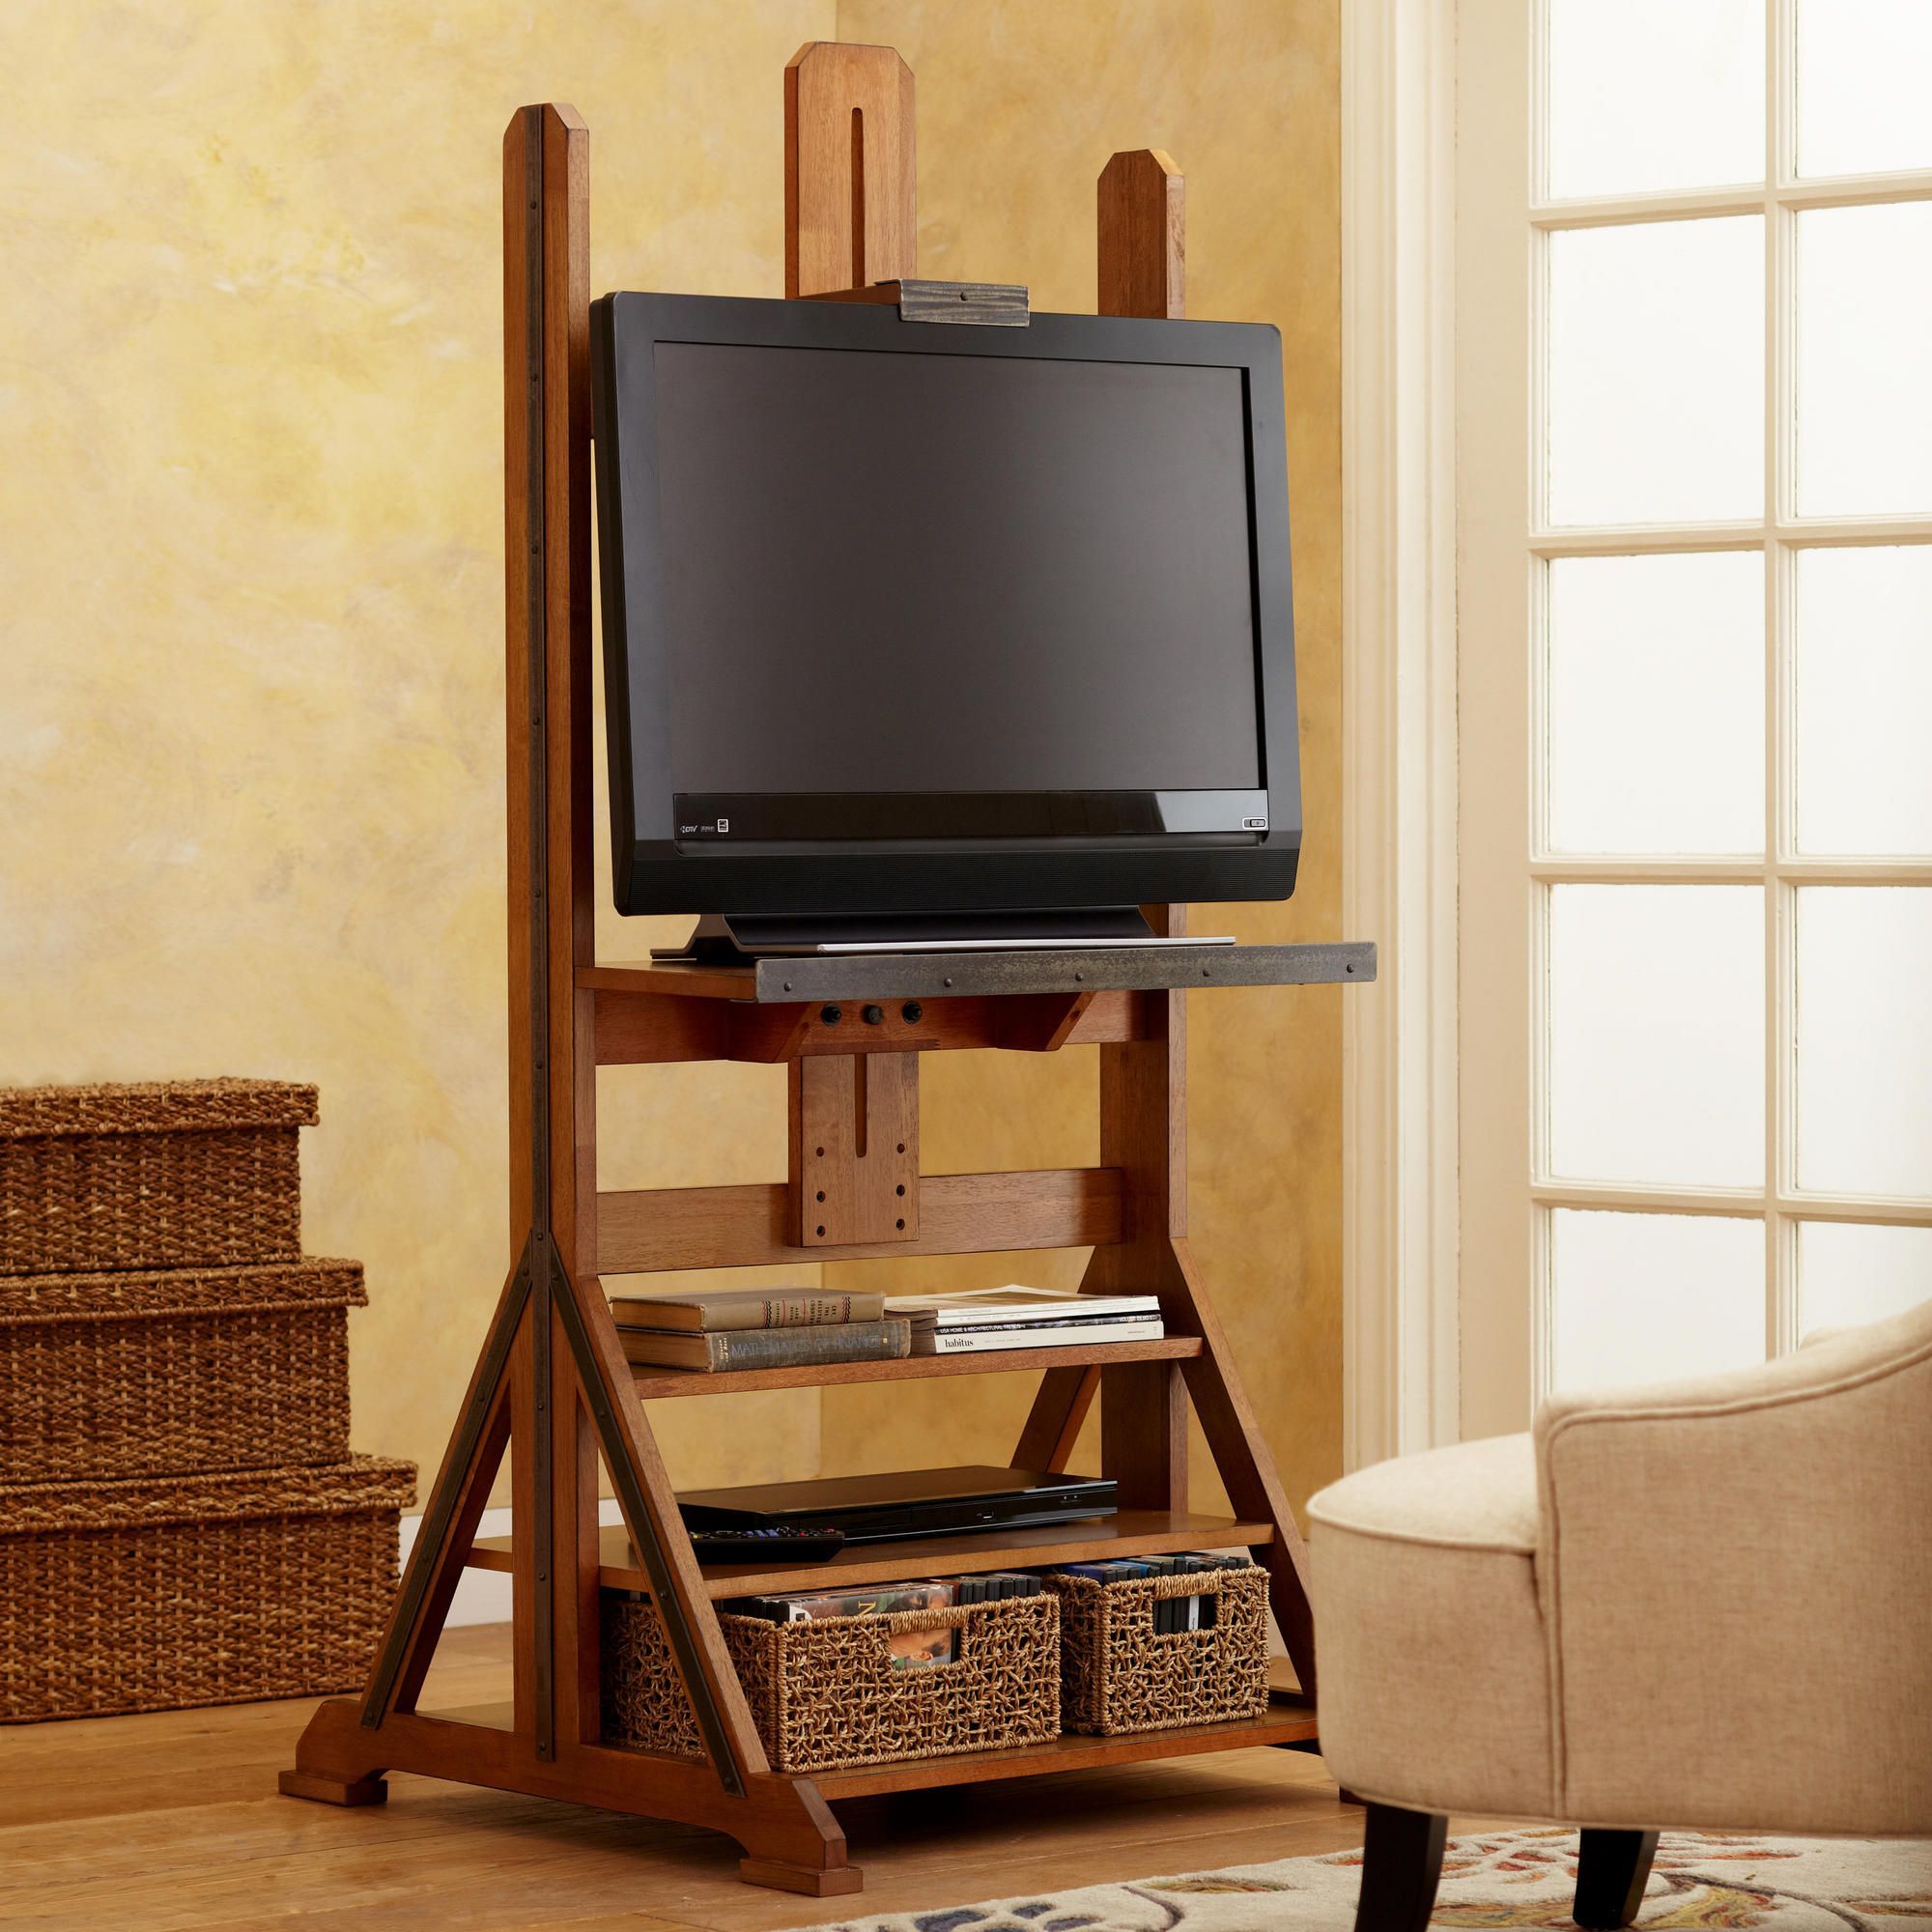 Easel Media Stand | Wooden Tv Stands, Furniture, Art Easel Inside Metal And Wood Tv Stands (View 8 of 15)